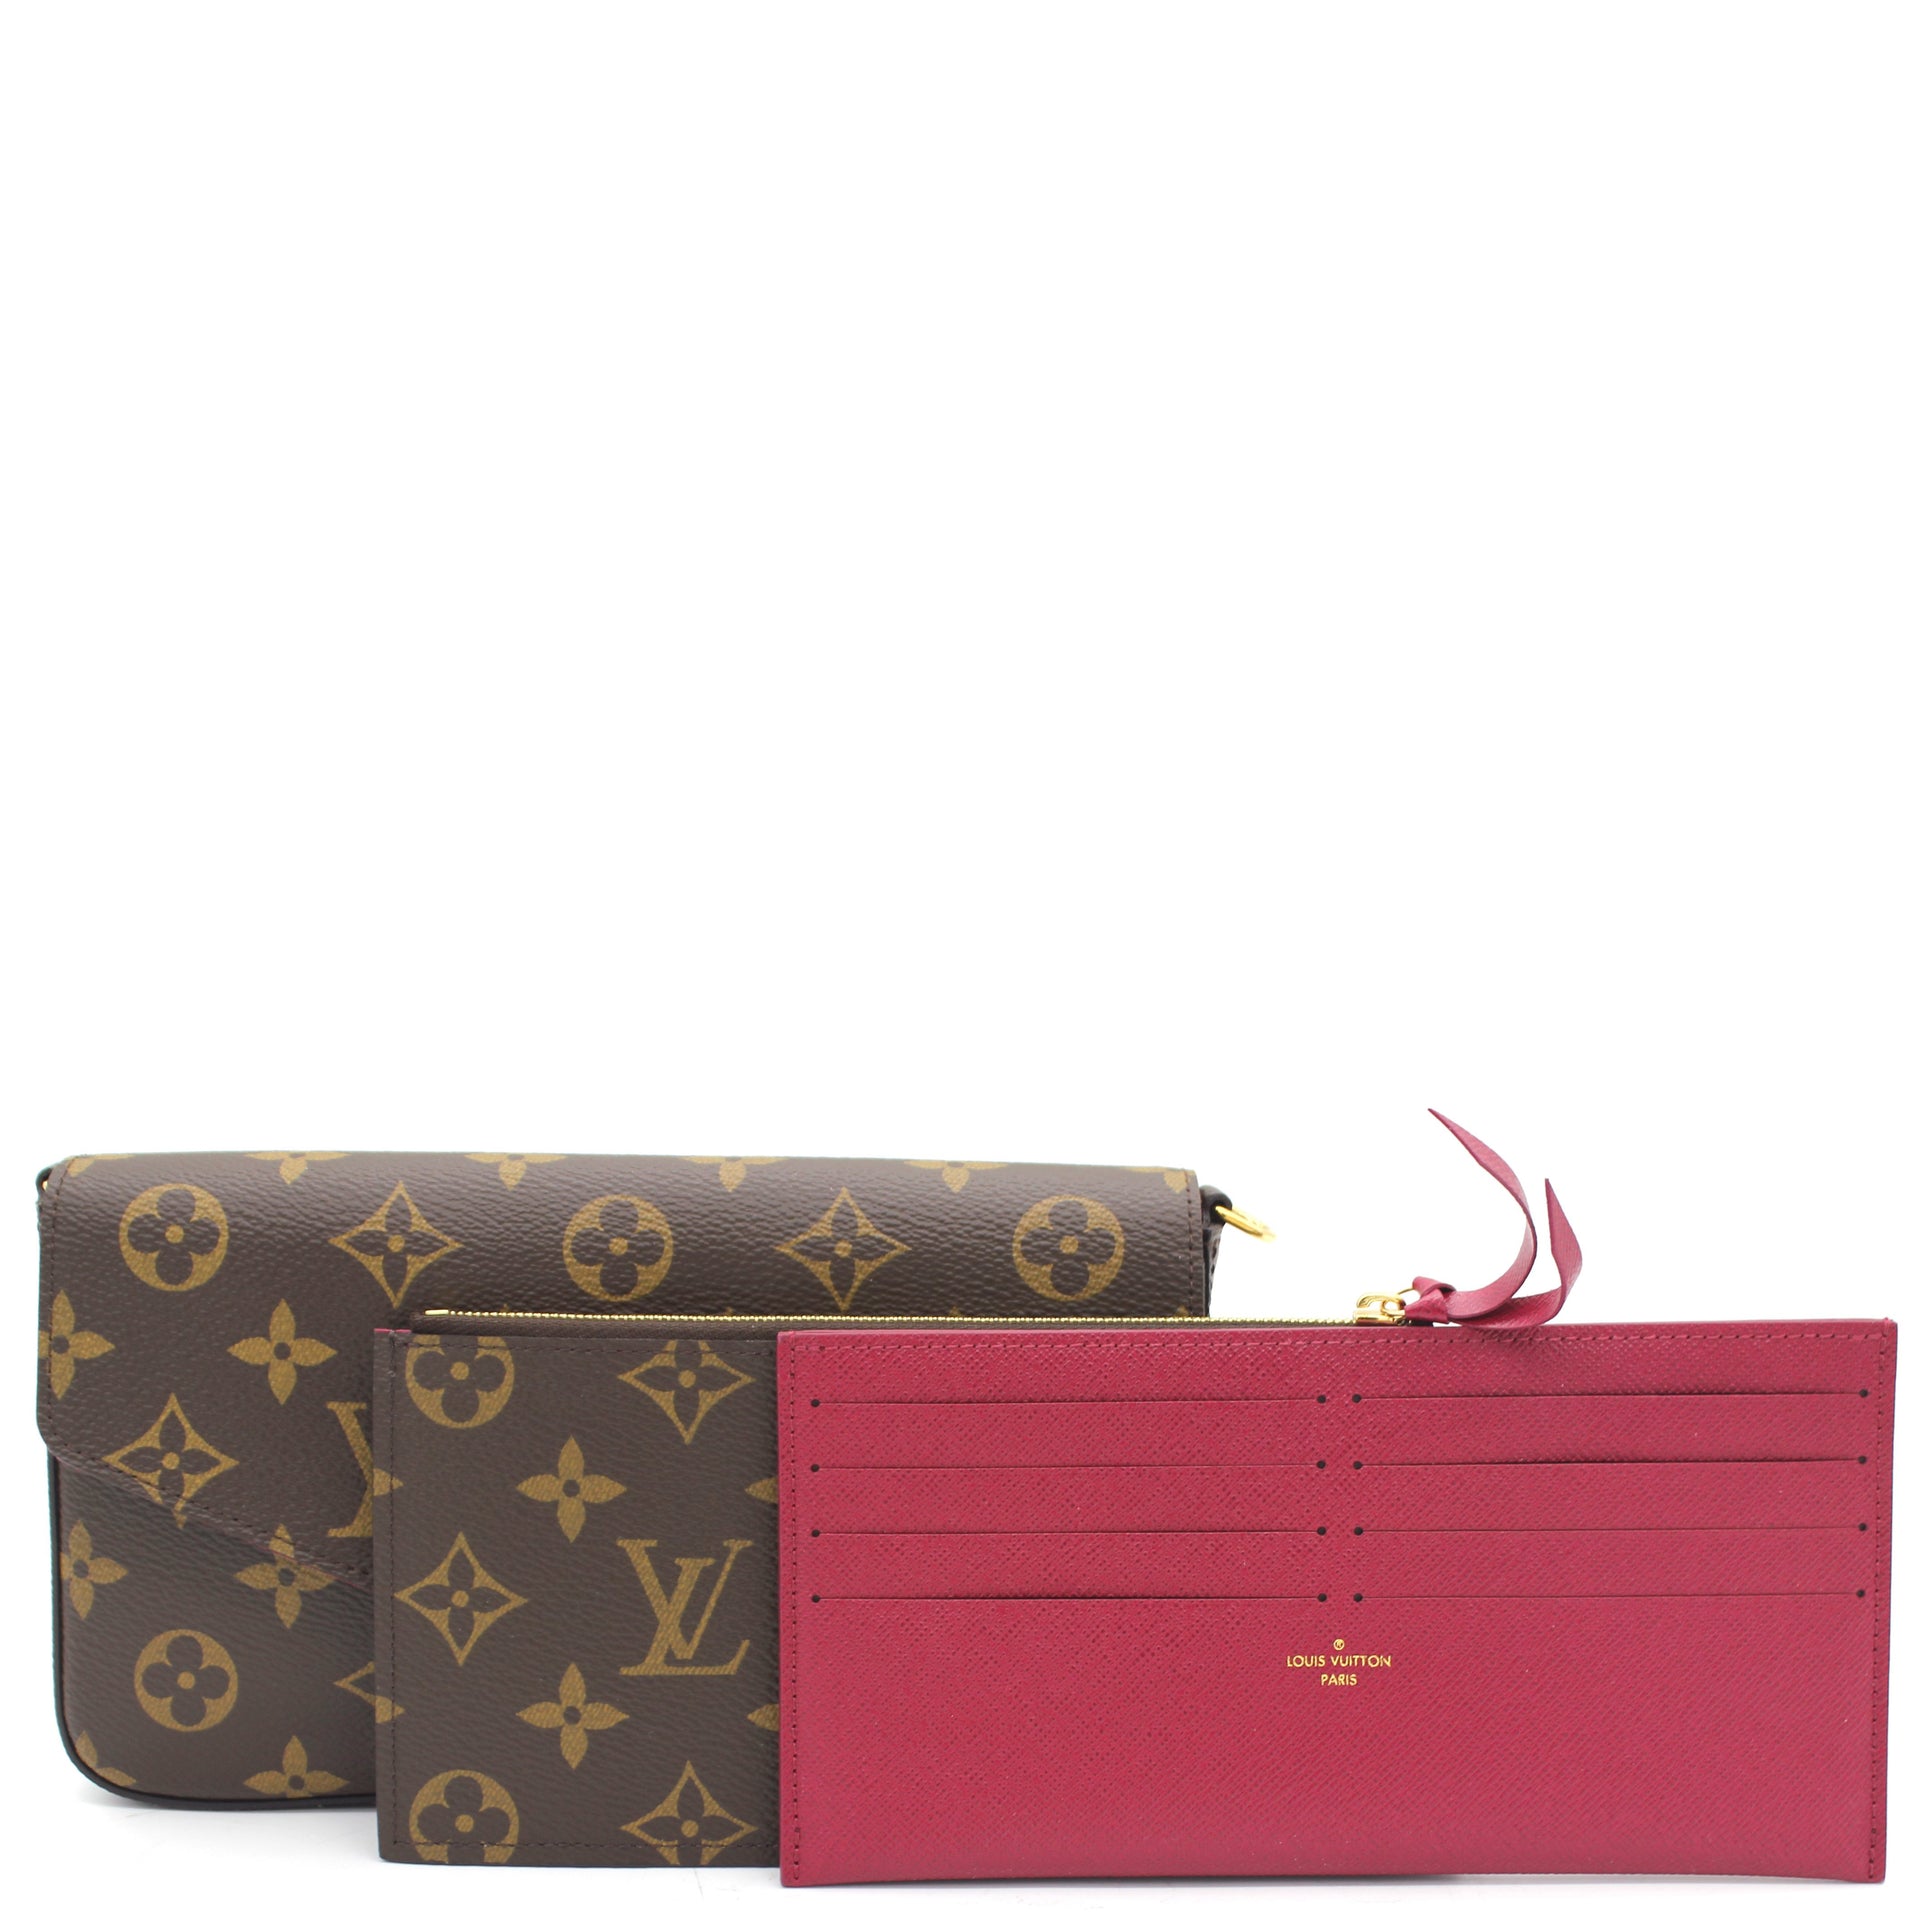 Lv Felicie, Shop The Largest Collection